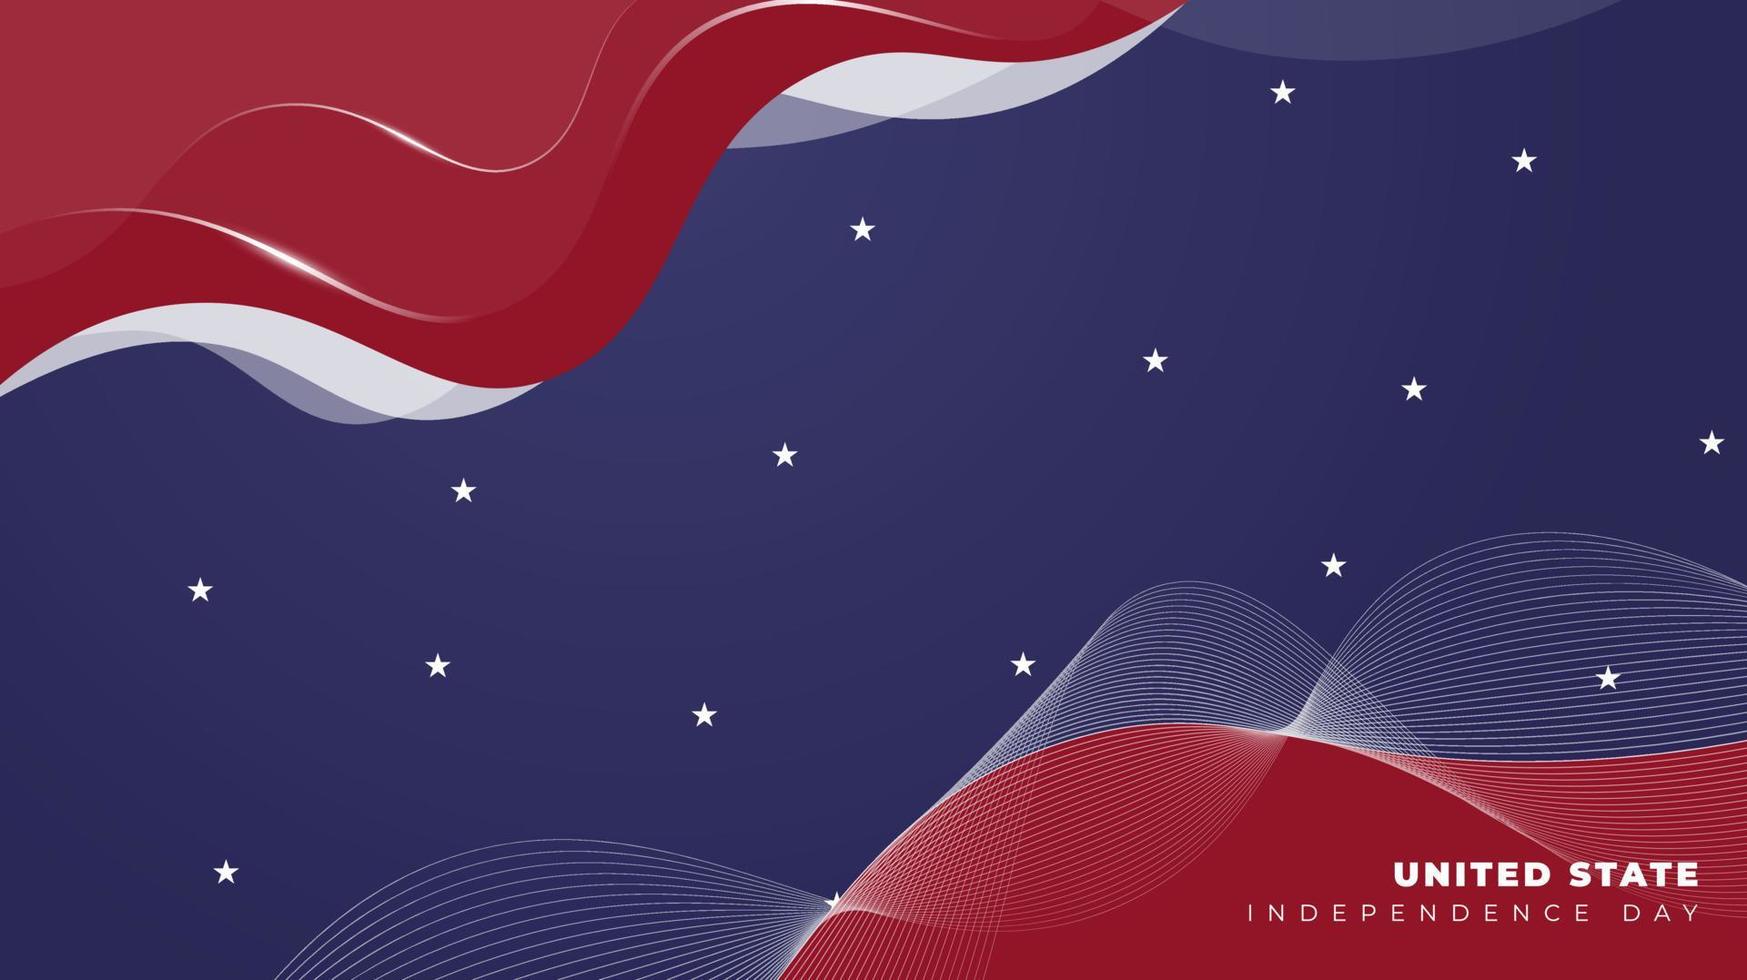 Waving red and blue background design for US independence day template design vector